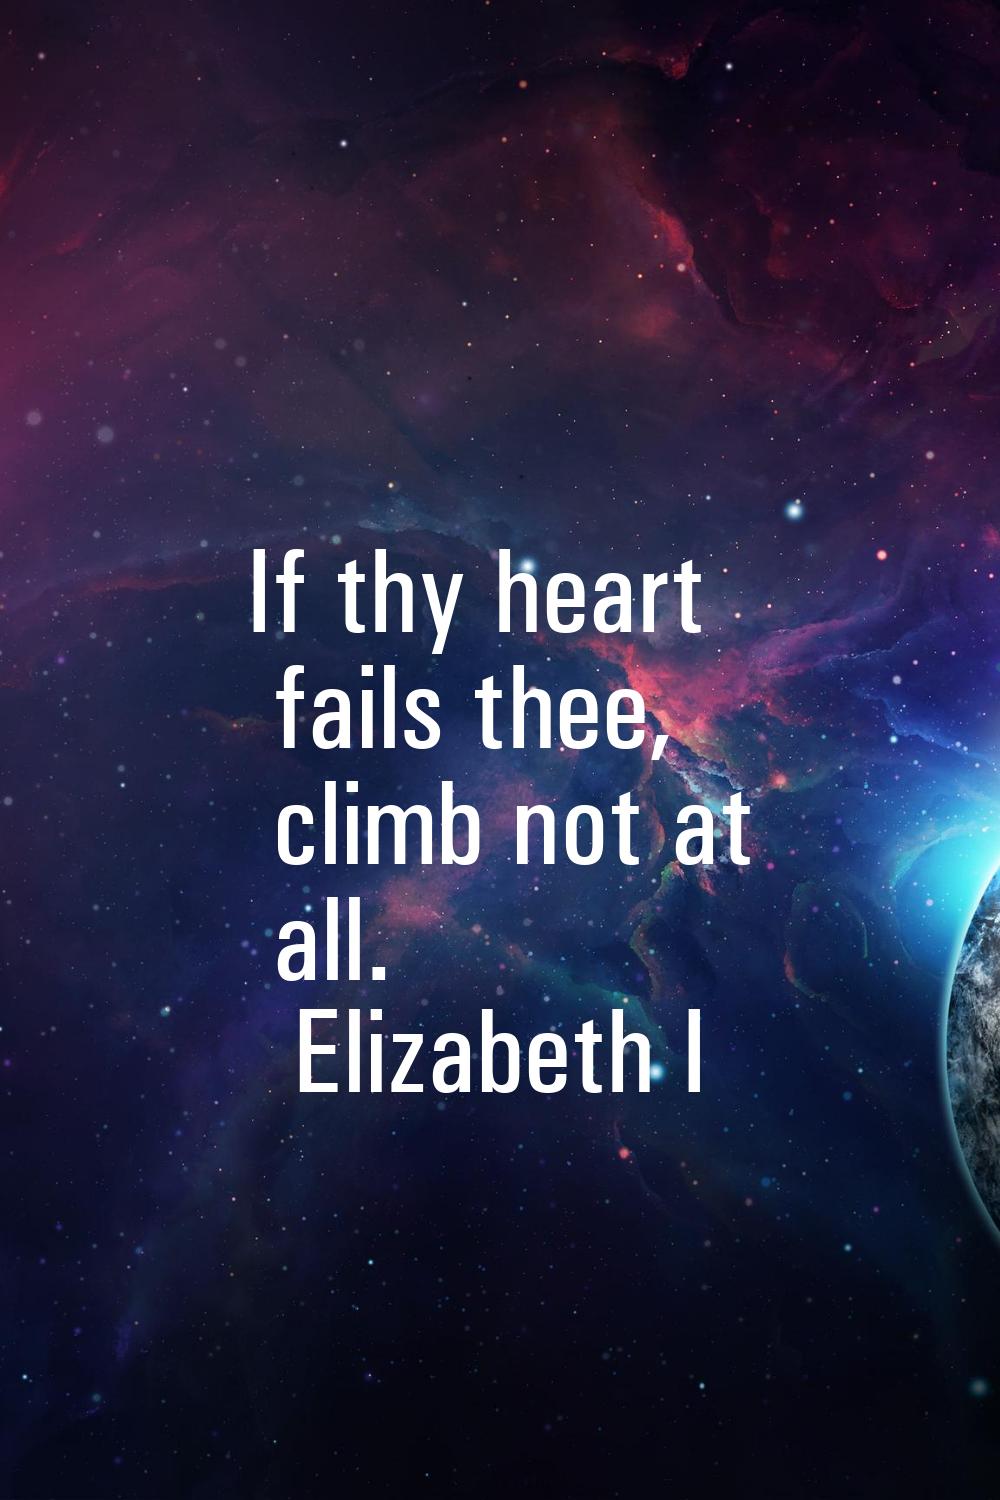 If thy heart fails thee, climb not at all.